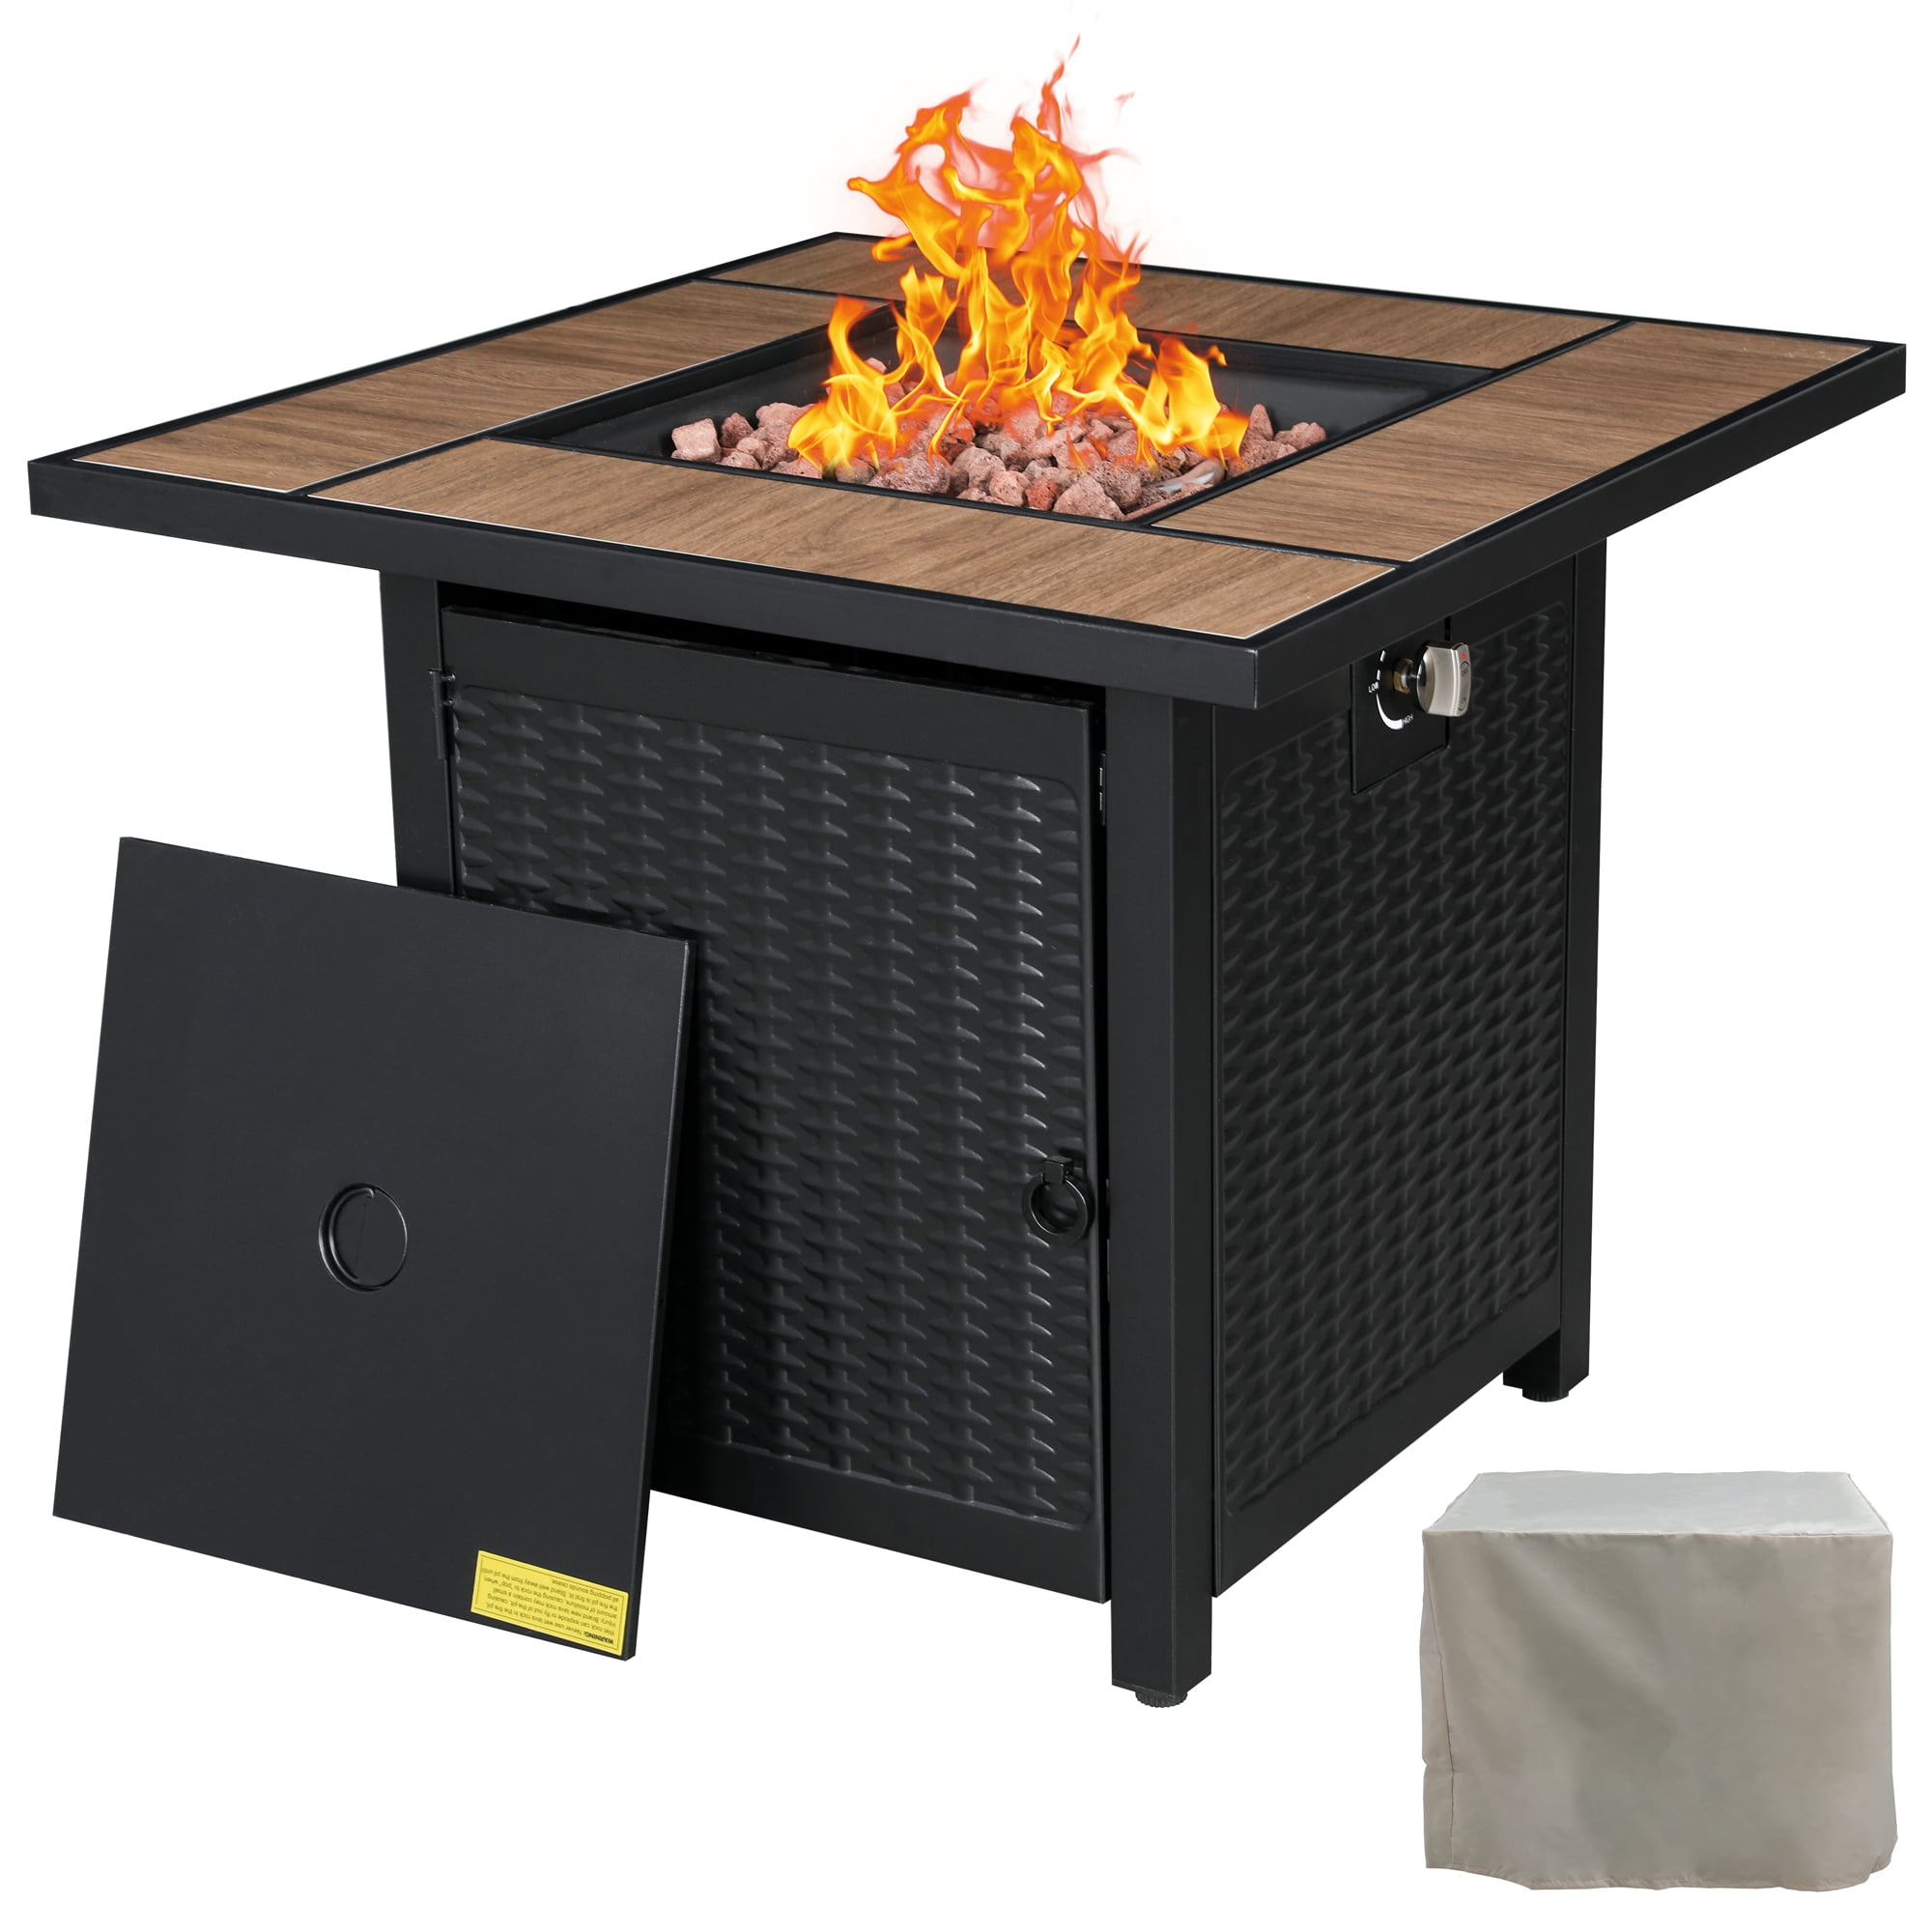 Walsunny 30" Propane Gas Fire Pit Table 50,000 BTU Square Outdoor Wicker Walnut Wood - image 1 of 9